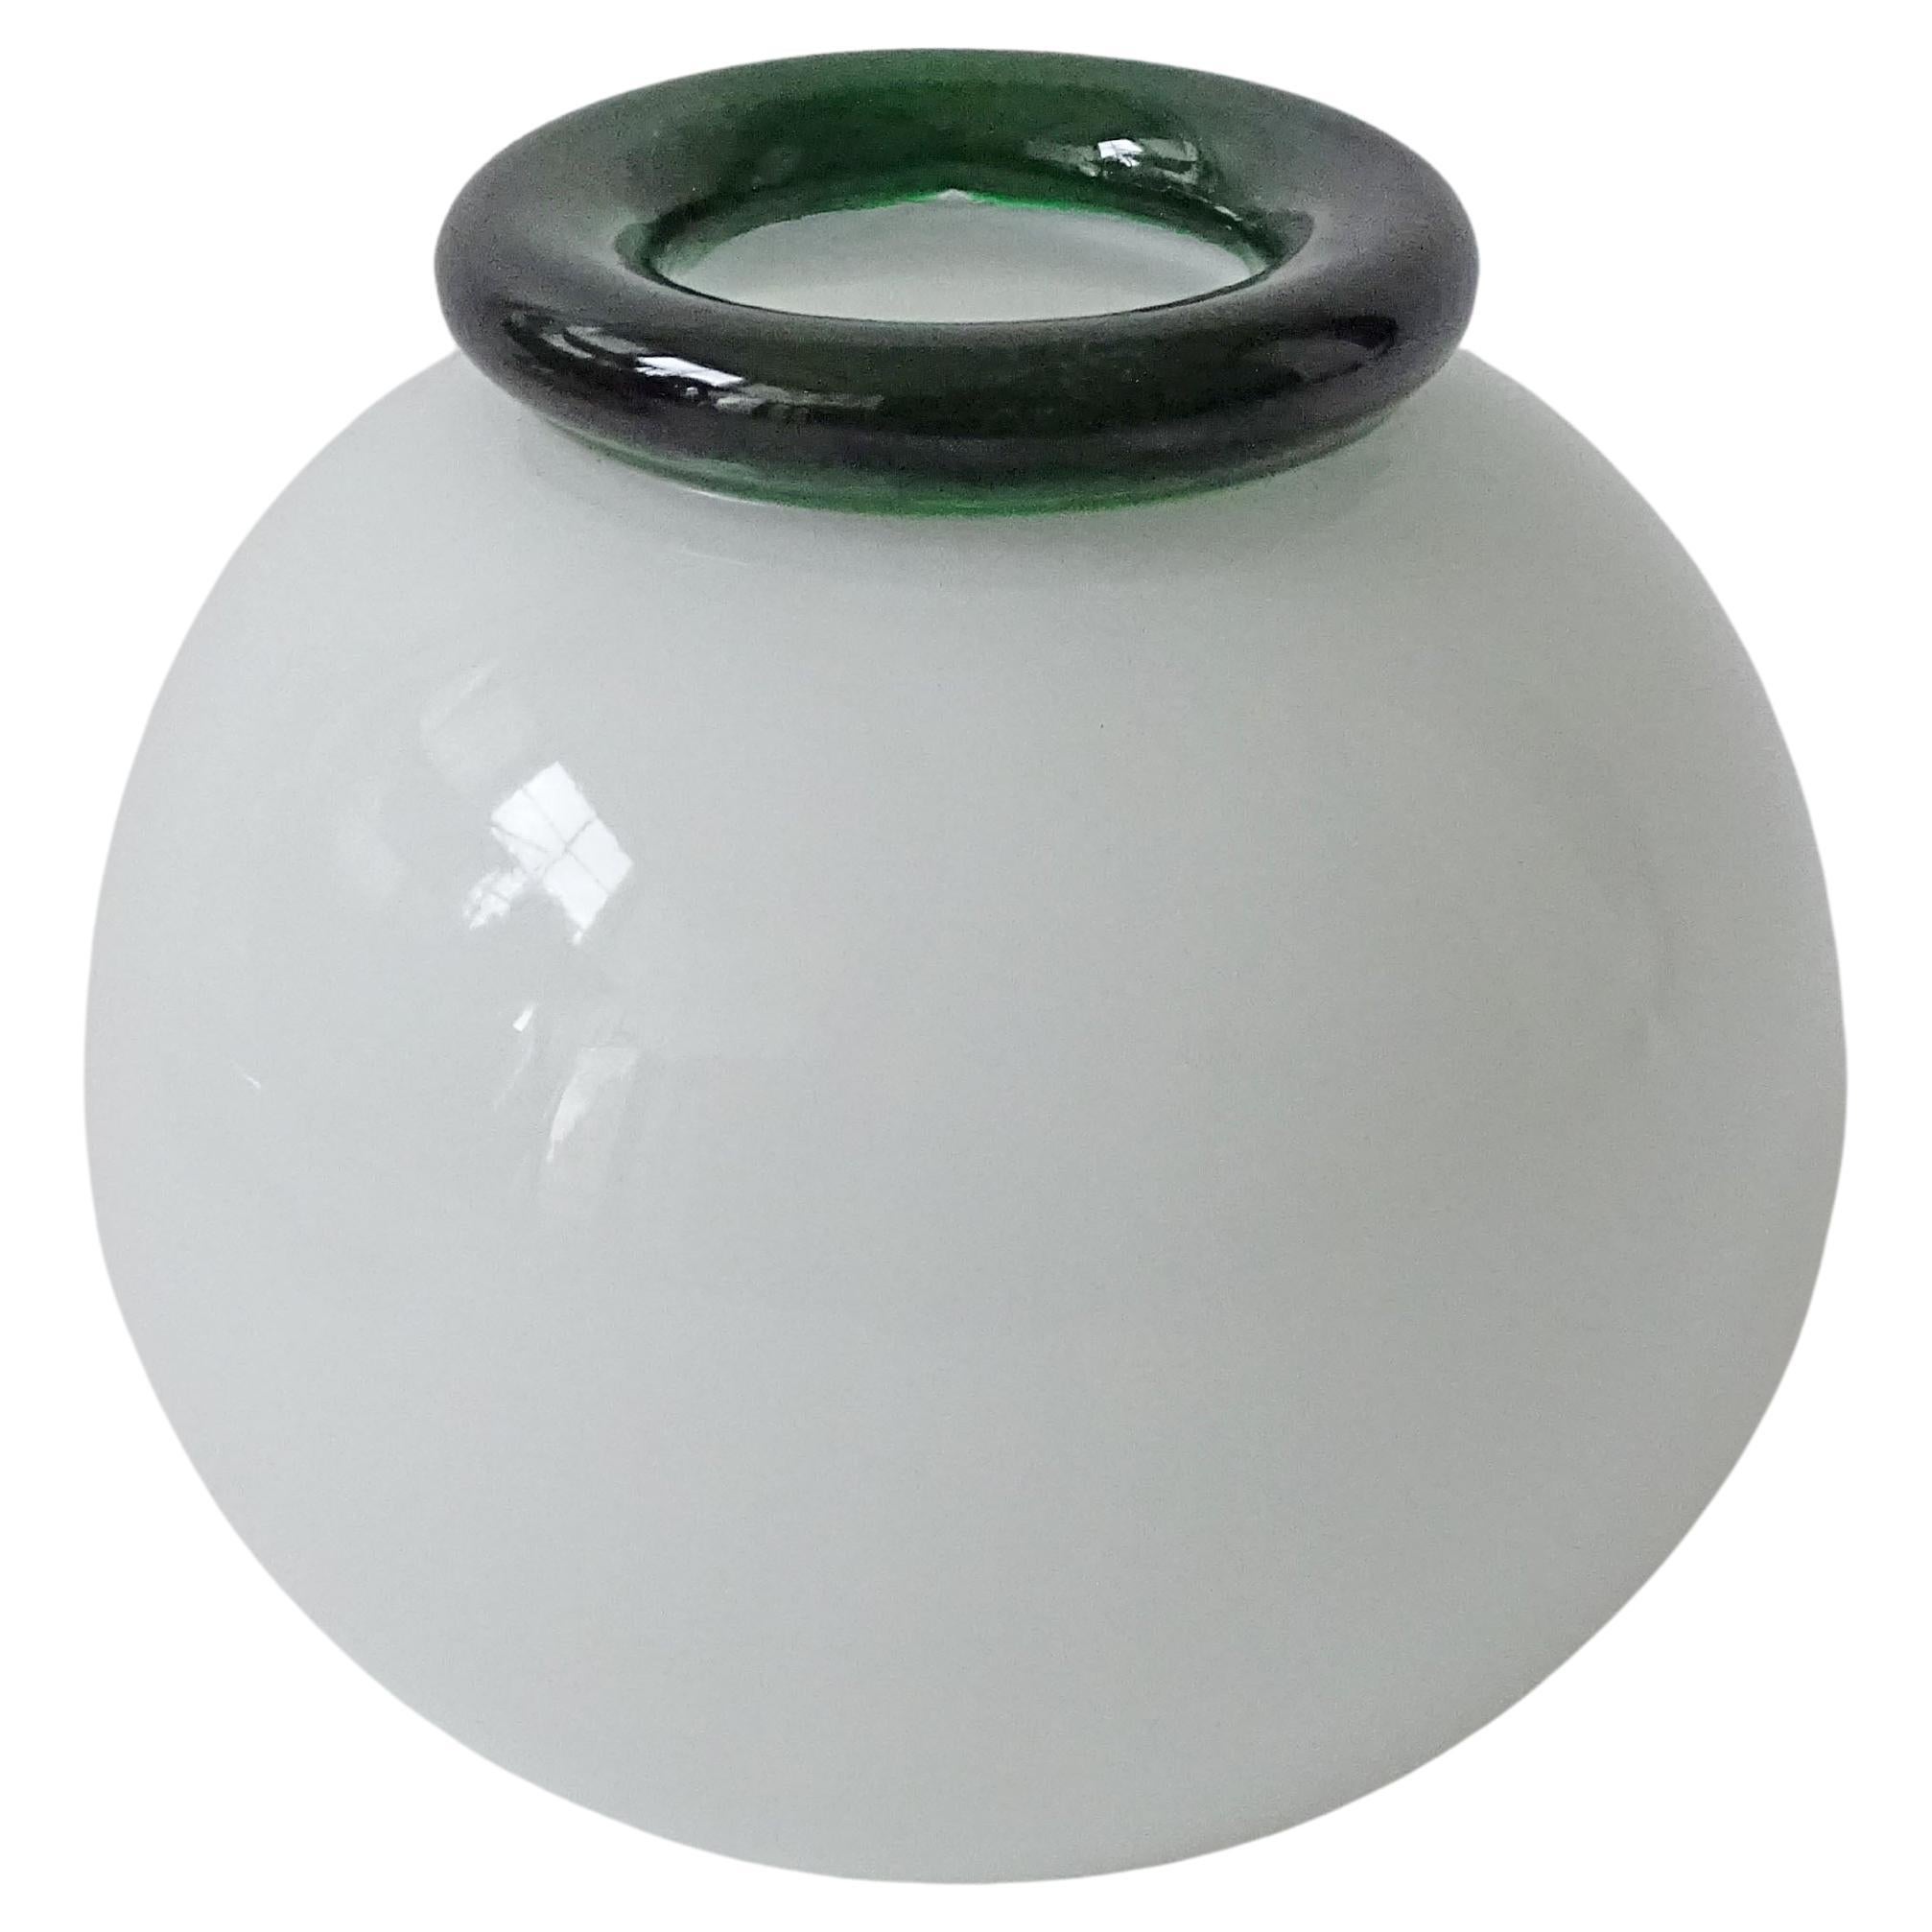 Soliflore Murano Glass Vase attributed to Ettore Sottsass for Vistosi For Sale